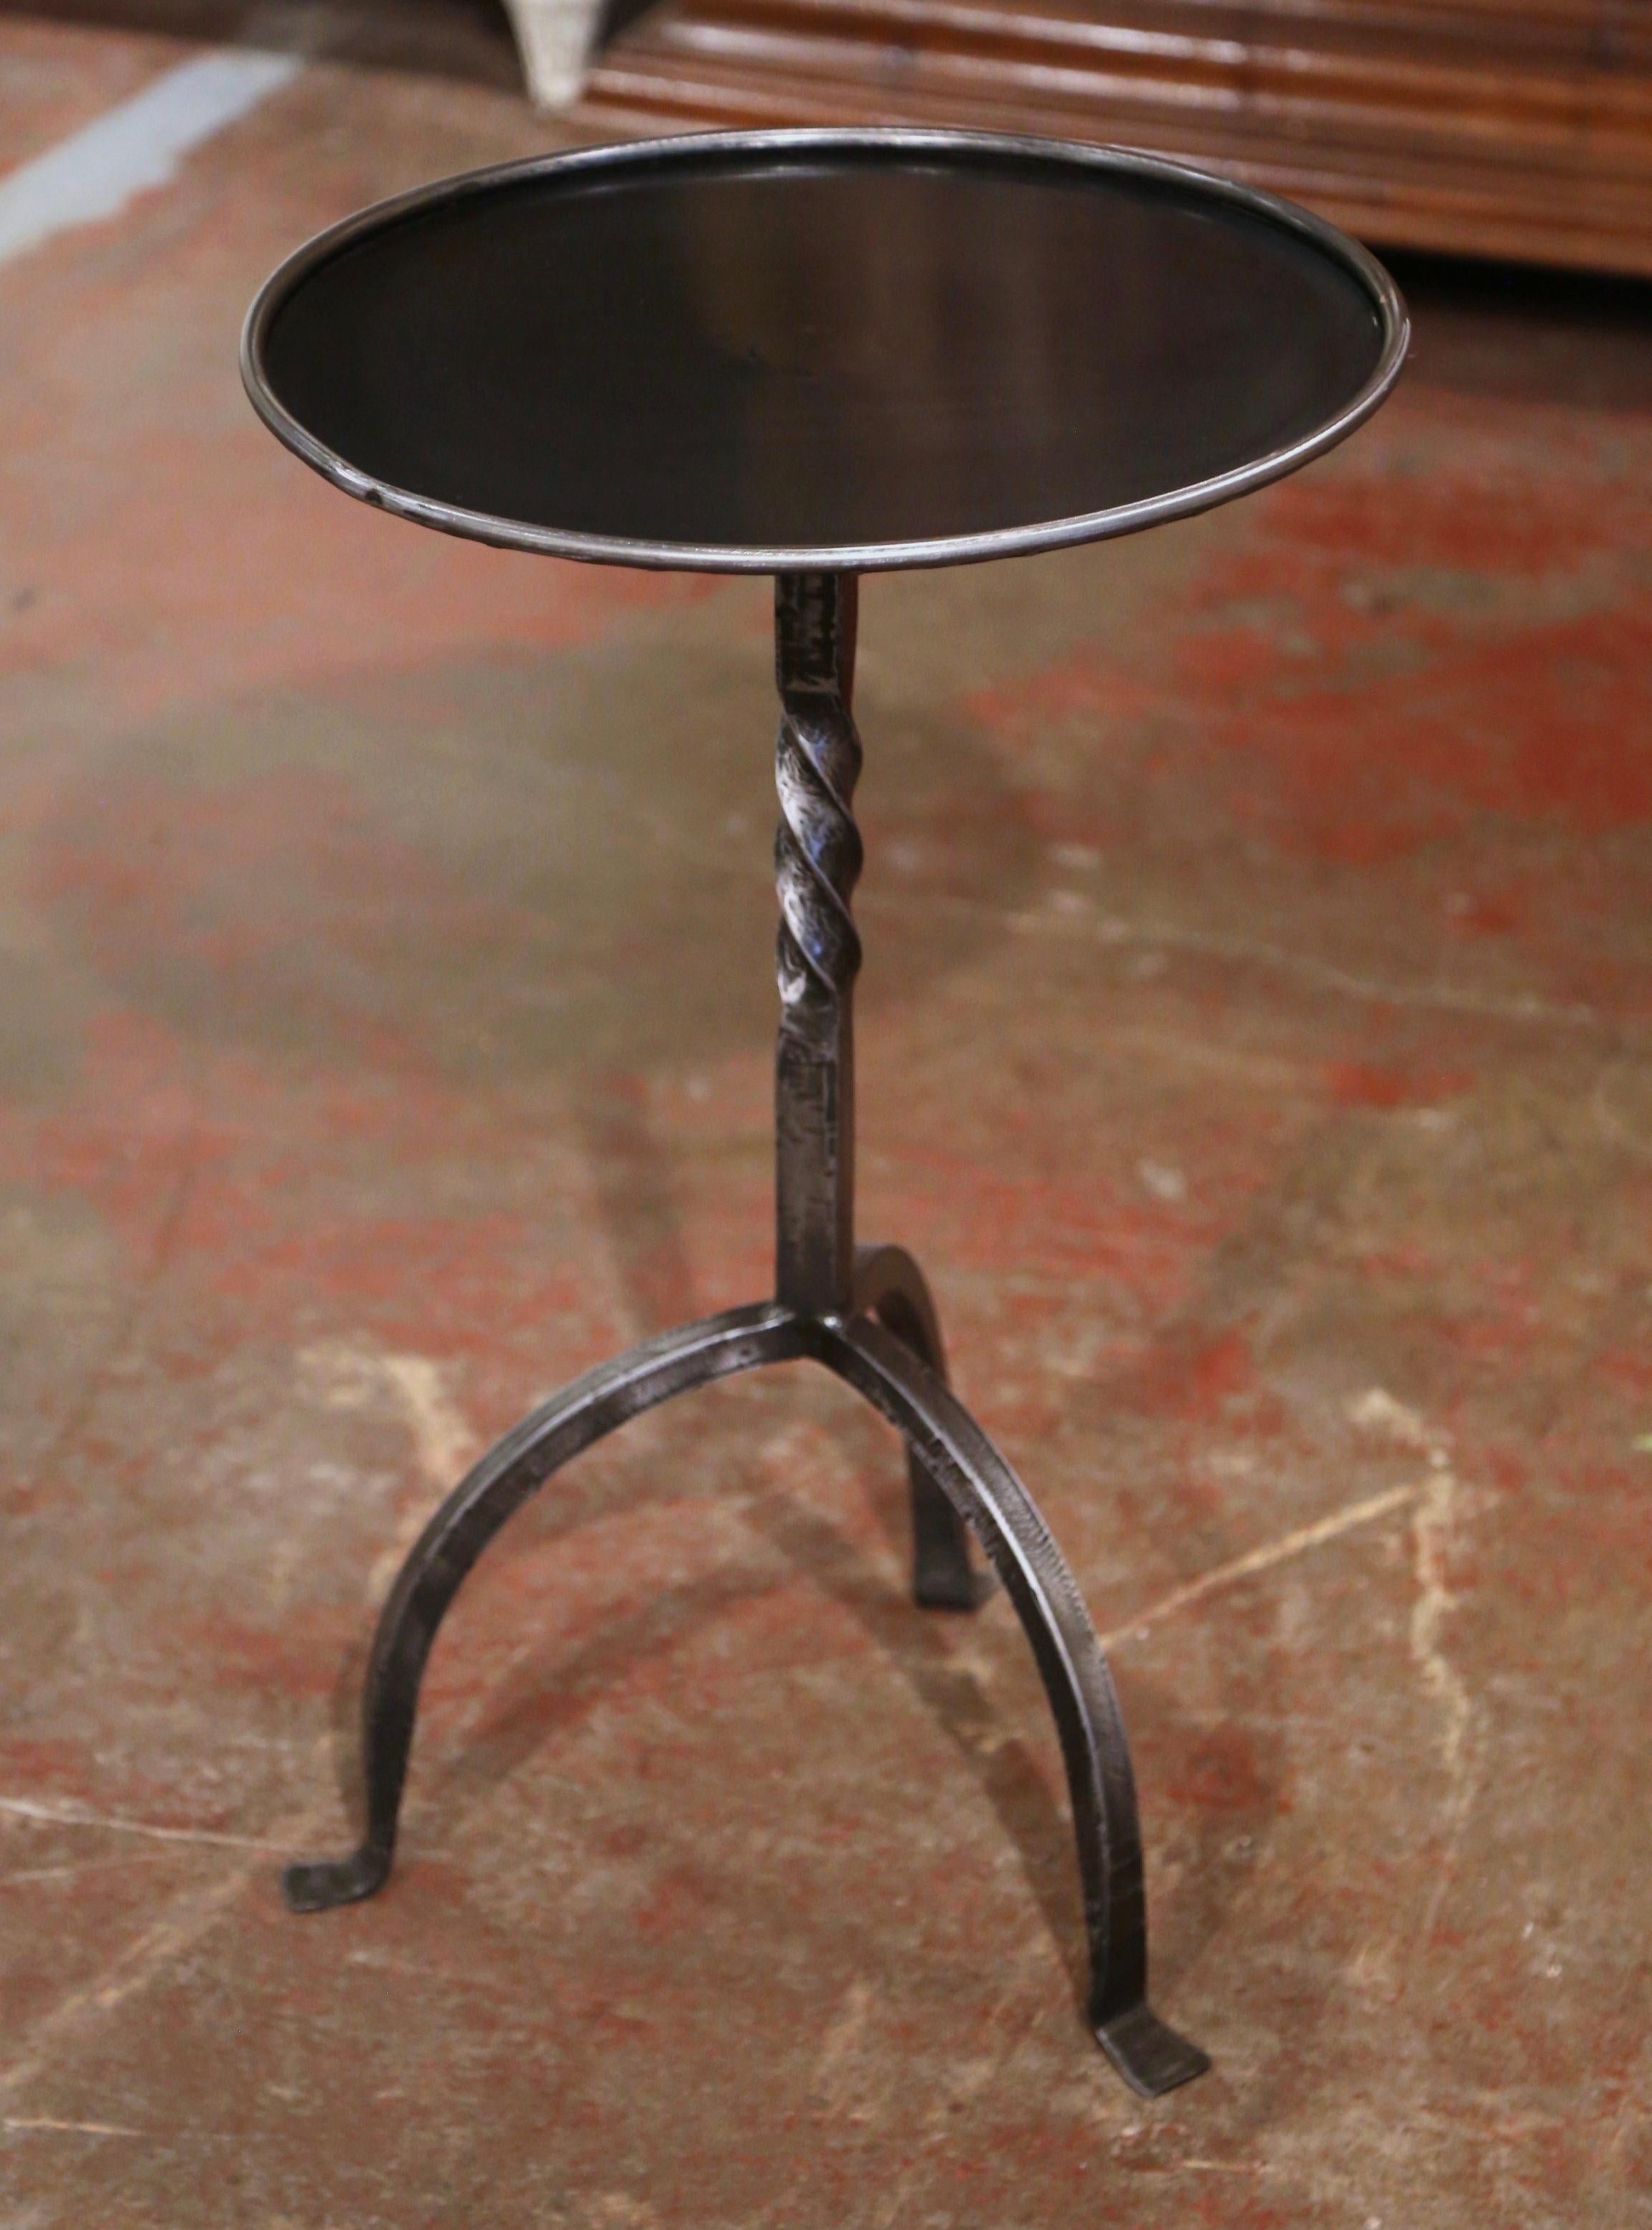 The elegant martini table features a central twisted pedestal stem over three curved legs ending with small feet. The vintage serving table is topped with a round surface decorated with a raised rim around the periphery. The chic, sophisticated